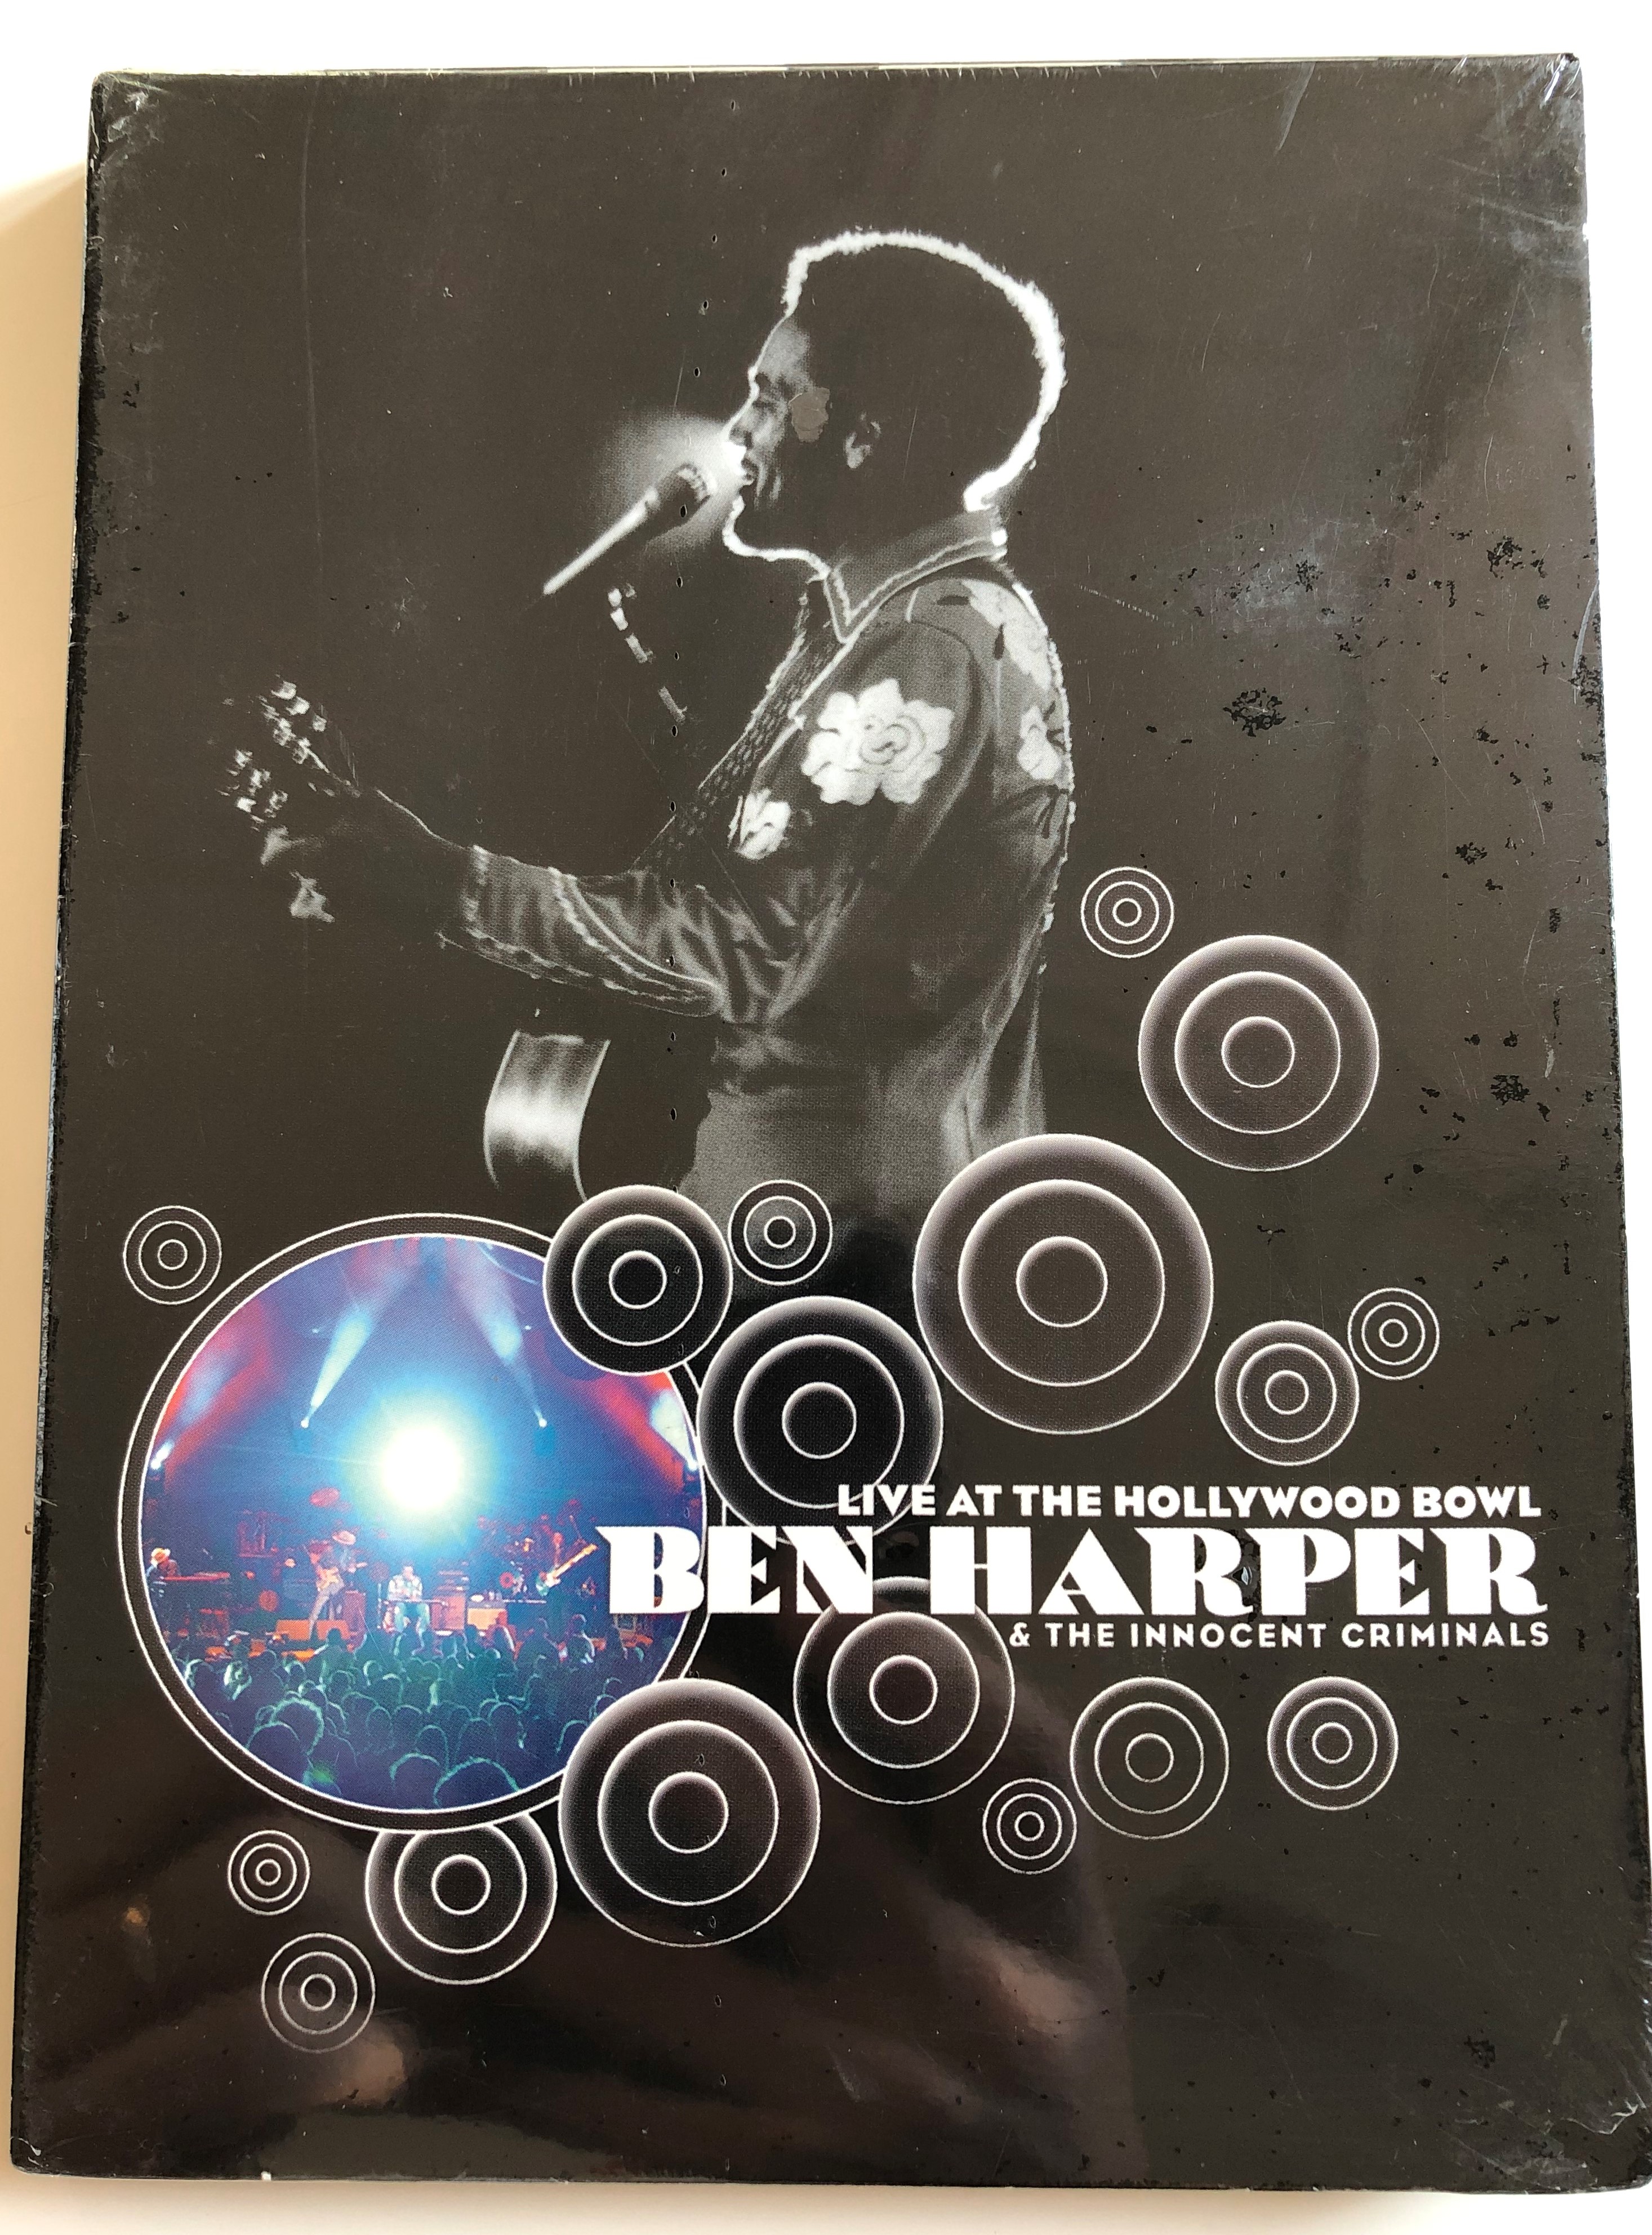 Ben Harper & The Innocent Criminals DVD 2003 Live at the Hollywood Bowl /  Directed by The Malloys / Bonus CD Audio - Live EP / Glory and Consequence,  Brown Eyed Blues,